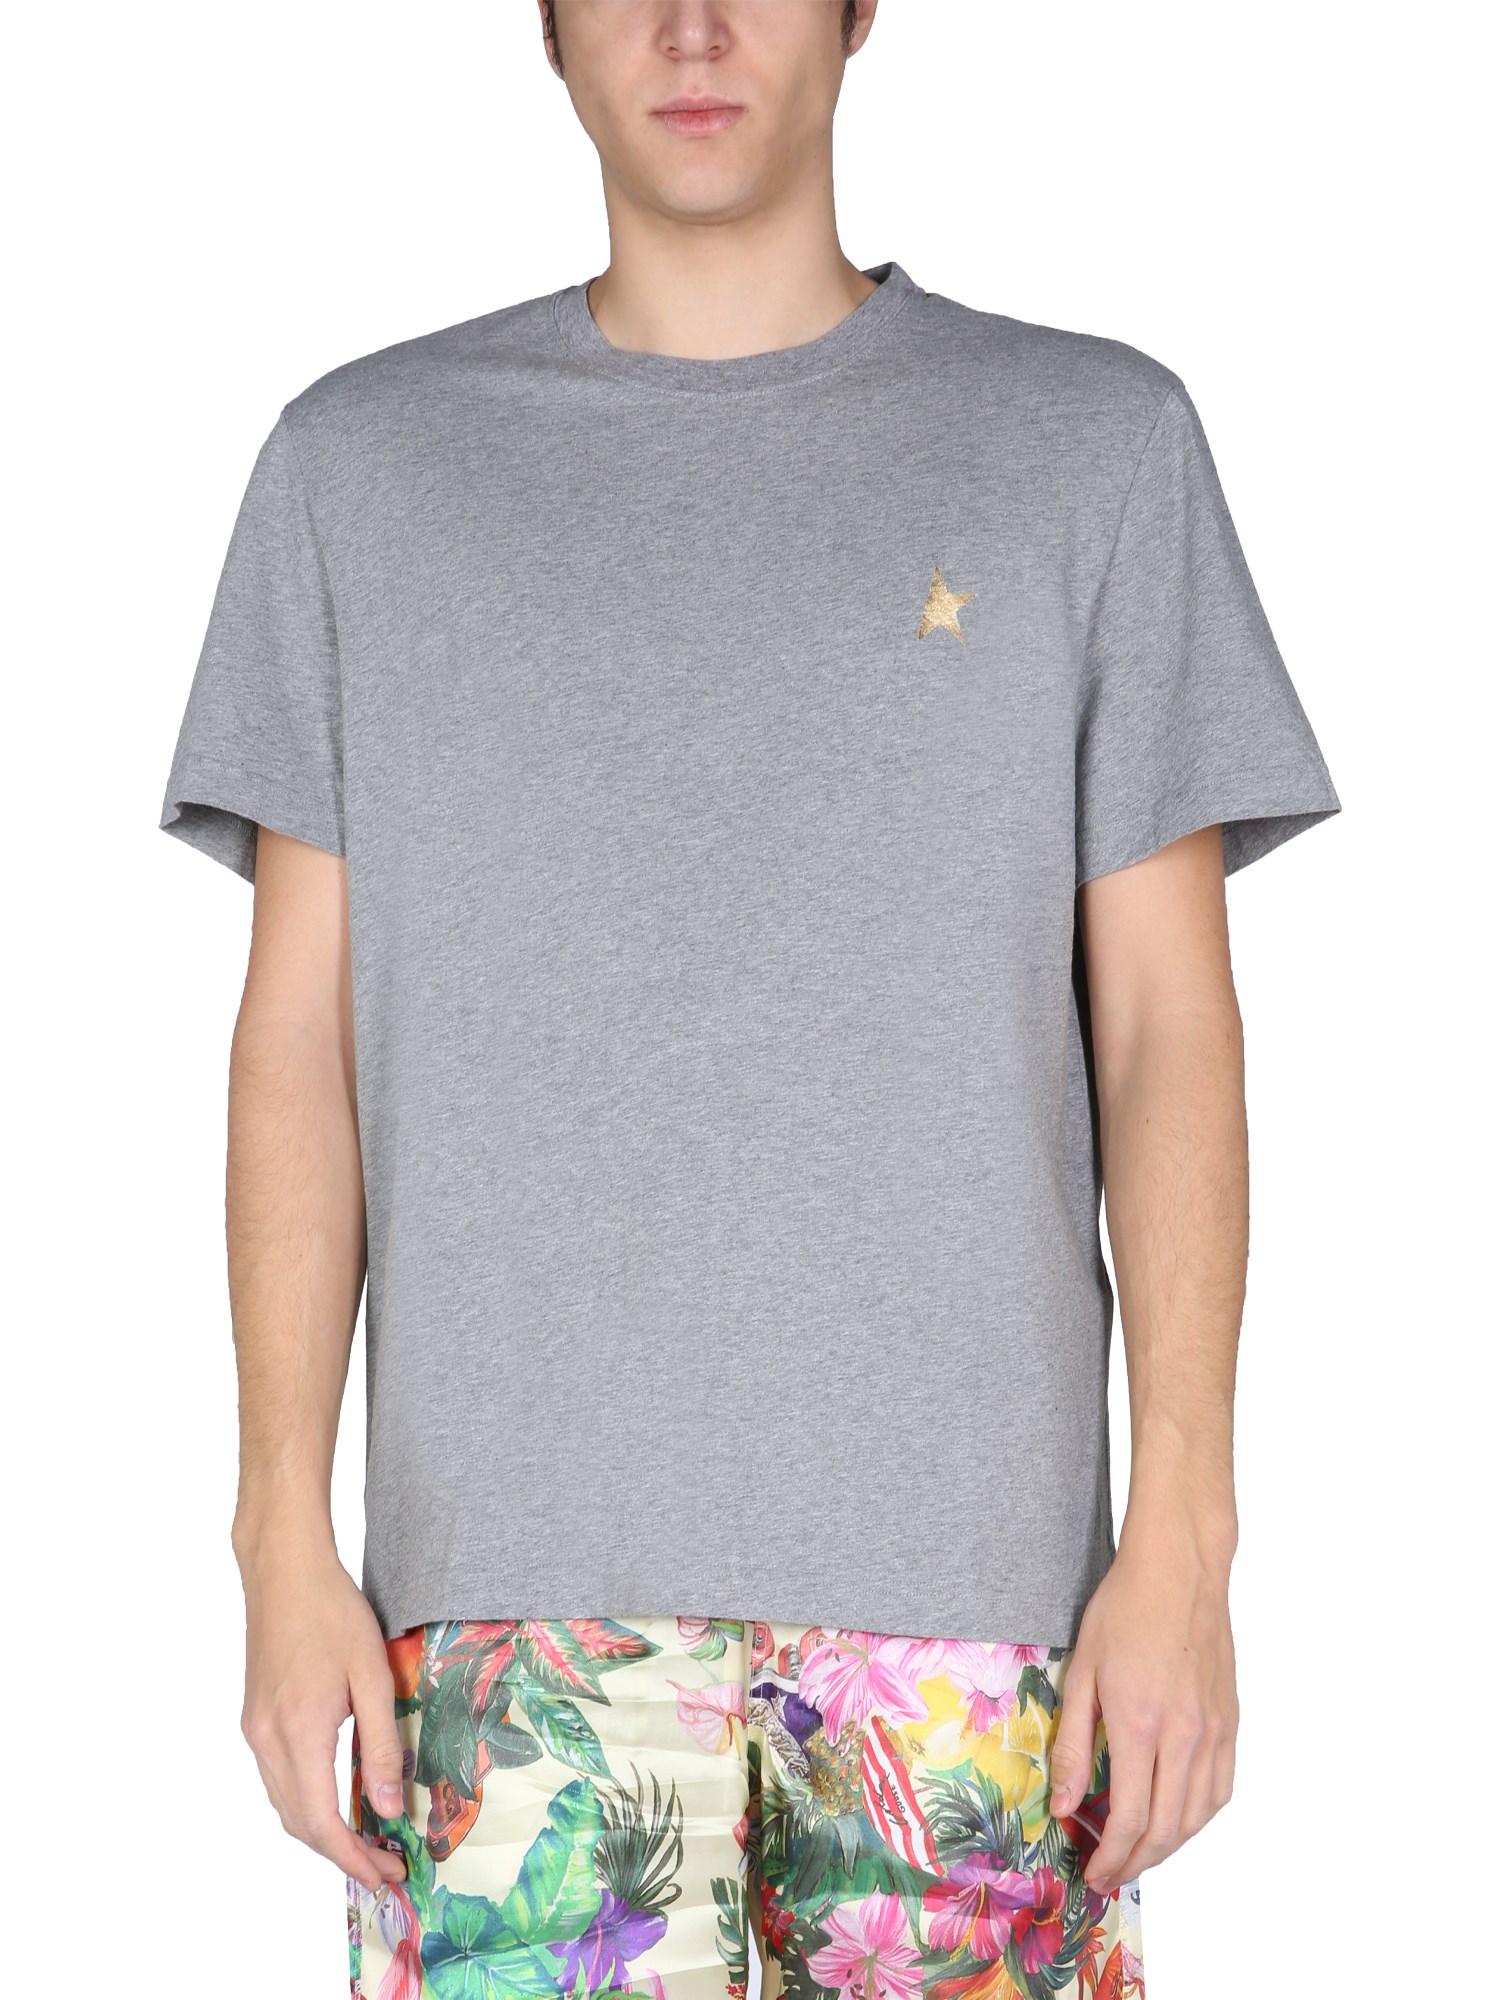 golden goose deluxe brand t-shirt with laminated star